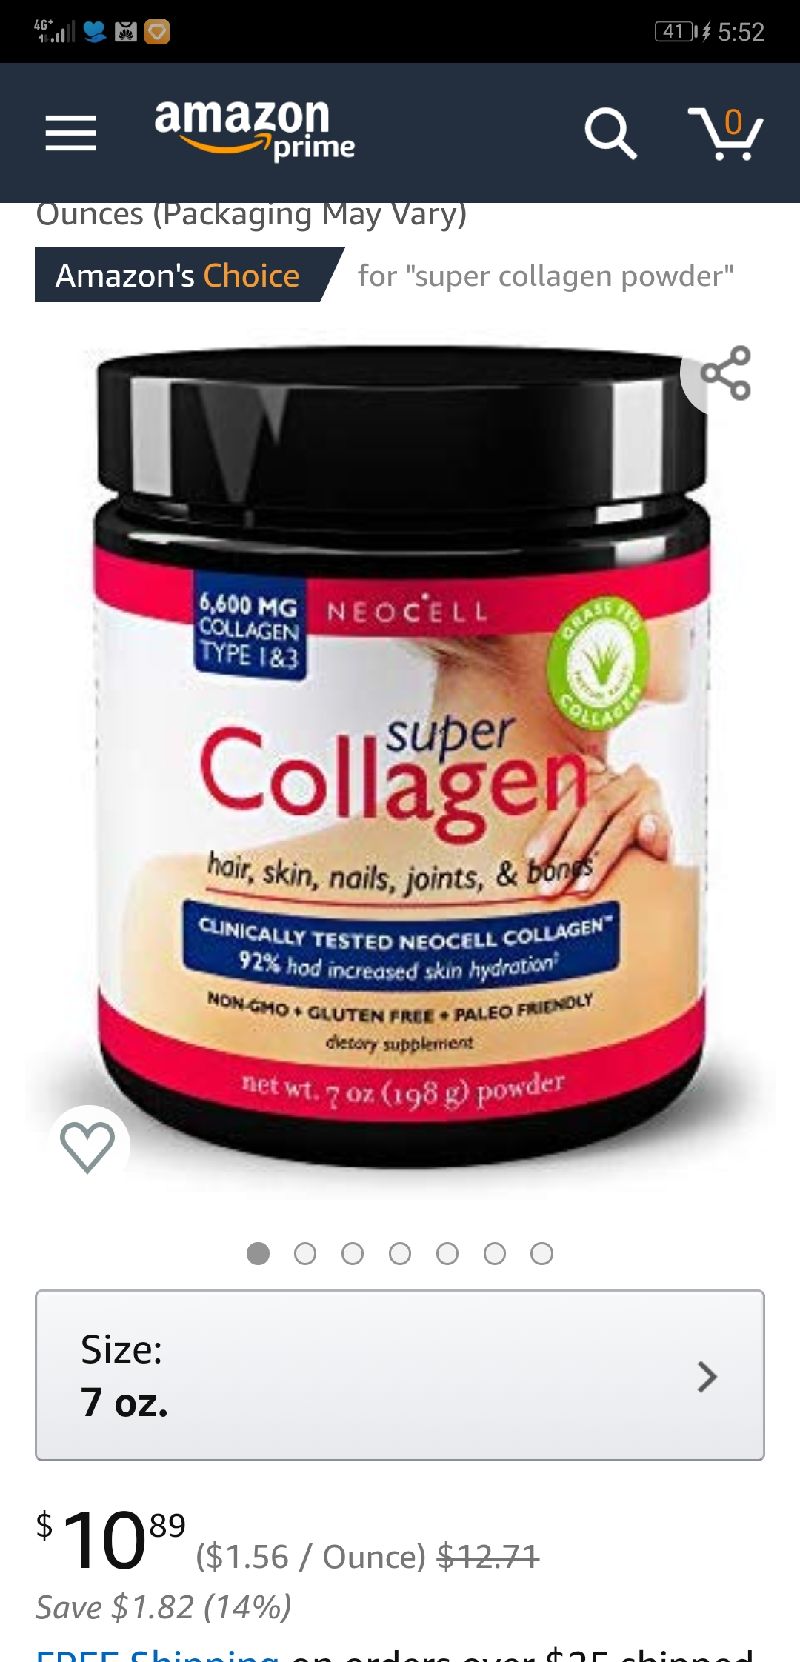 Amazon.com: NeoCell Super Collagen Powder – 6,600mg Collagen Types 1 & 3 - unflavored - 7 Ounces (Packaging May Vary): Gateway胶原蛋白粉 7oz